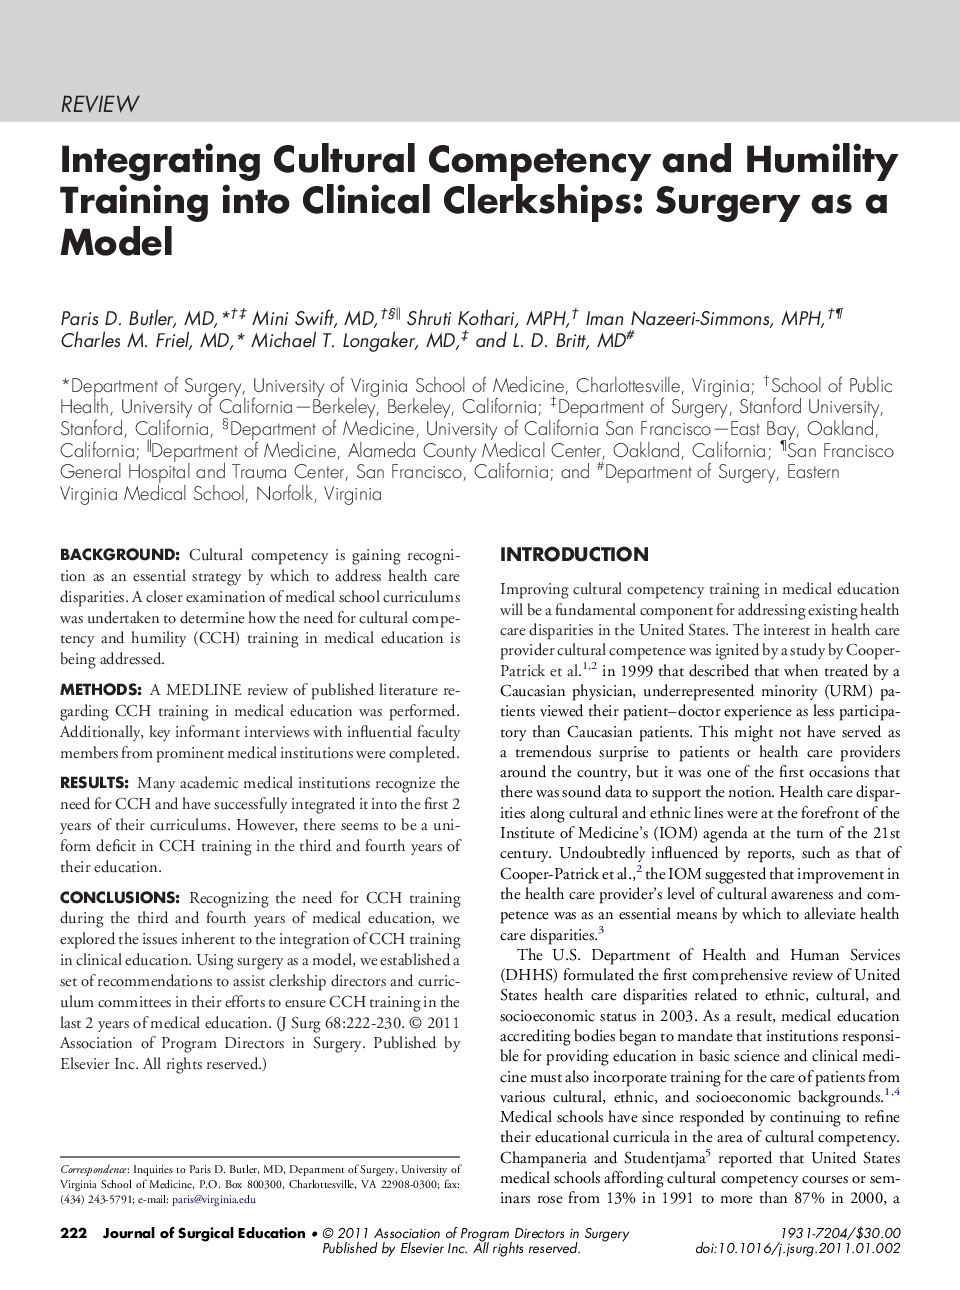 Integrating Cultural Competency and Humility Training into Clinical Clerkships: Surgery as a Model